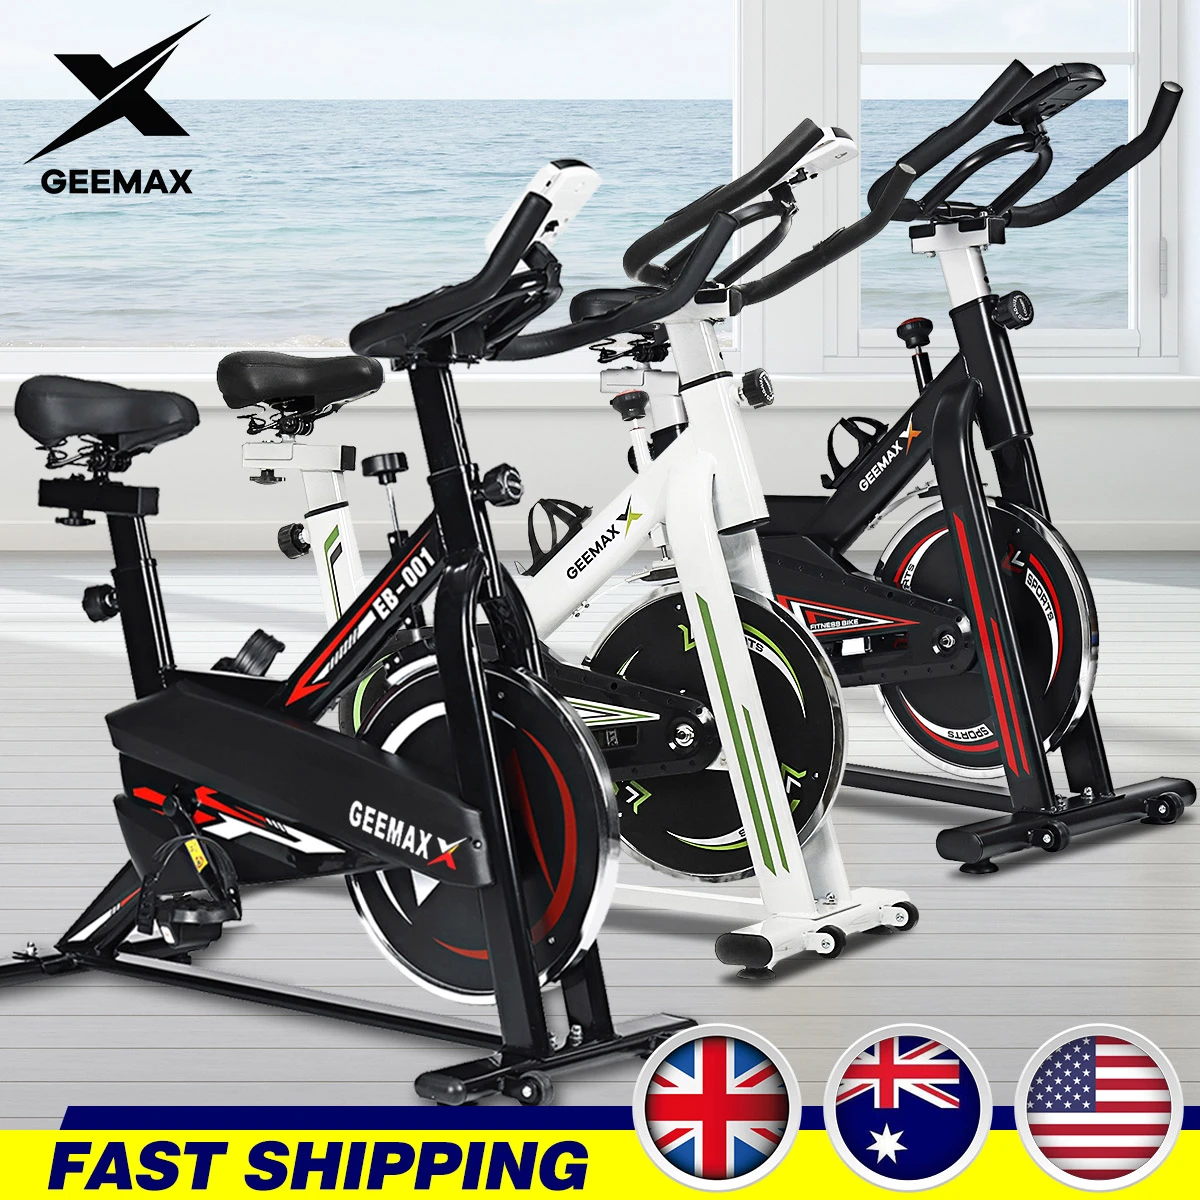 Home Aerobic Exercise Bike Gym Silent Workout Fitness Trainer Cardio Machine UK